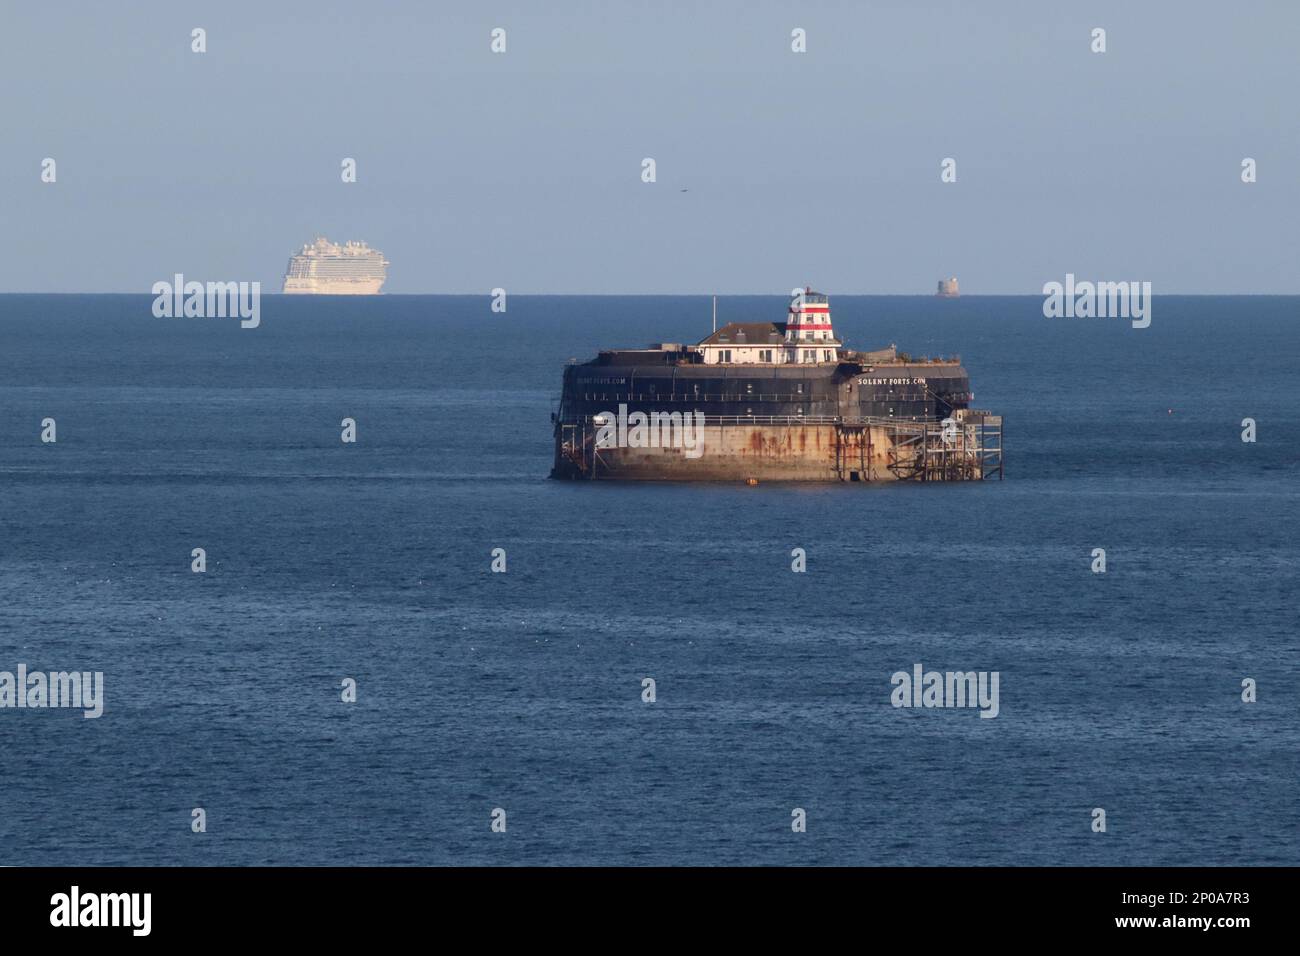 A Solent view - No Man's Land Fort in the foreground, while on the horizon, the Enchanted Princess cruise ship and Nab tower August 2022. Stock Photo